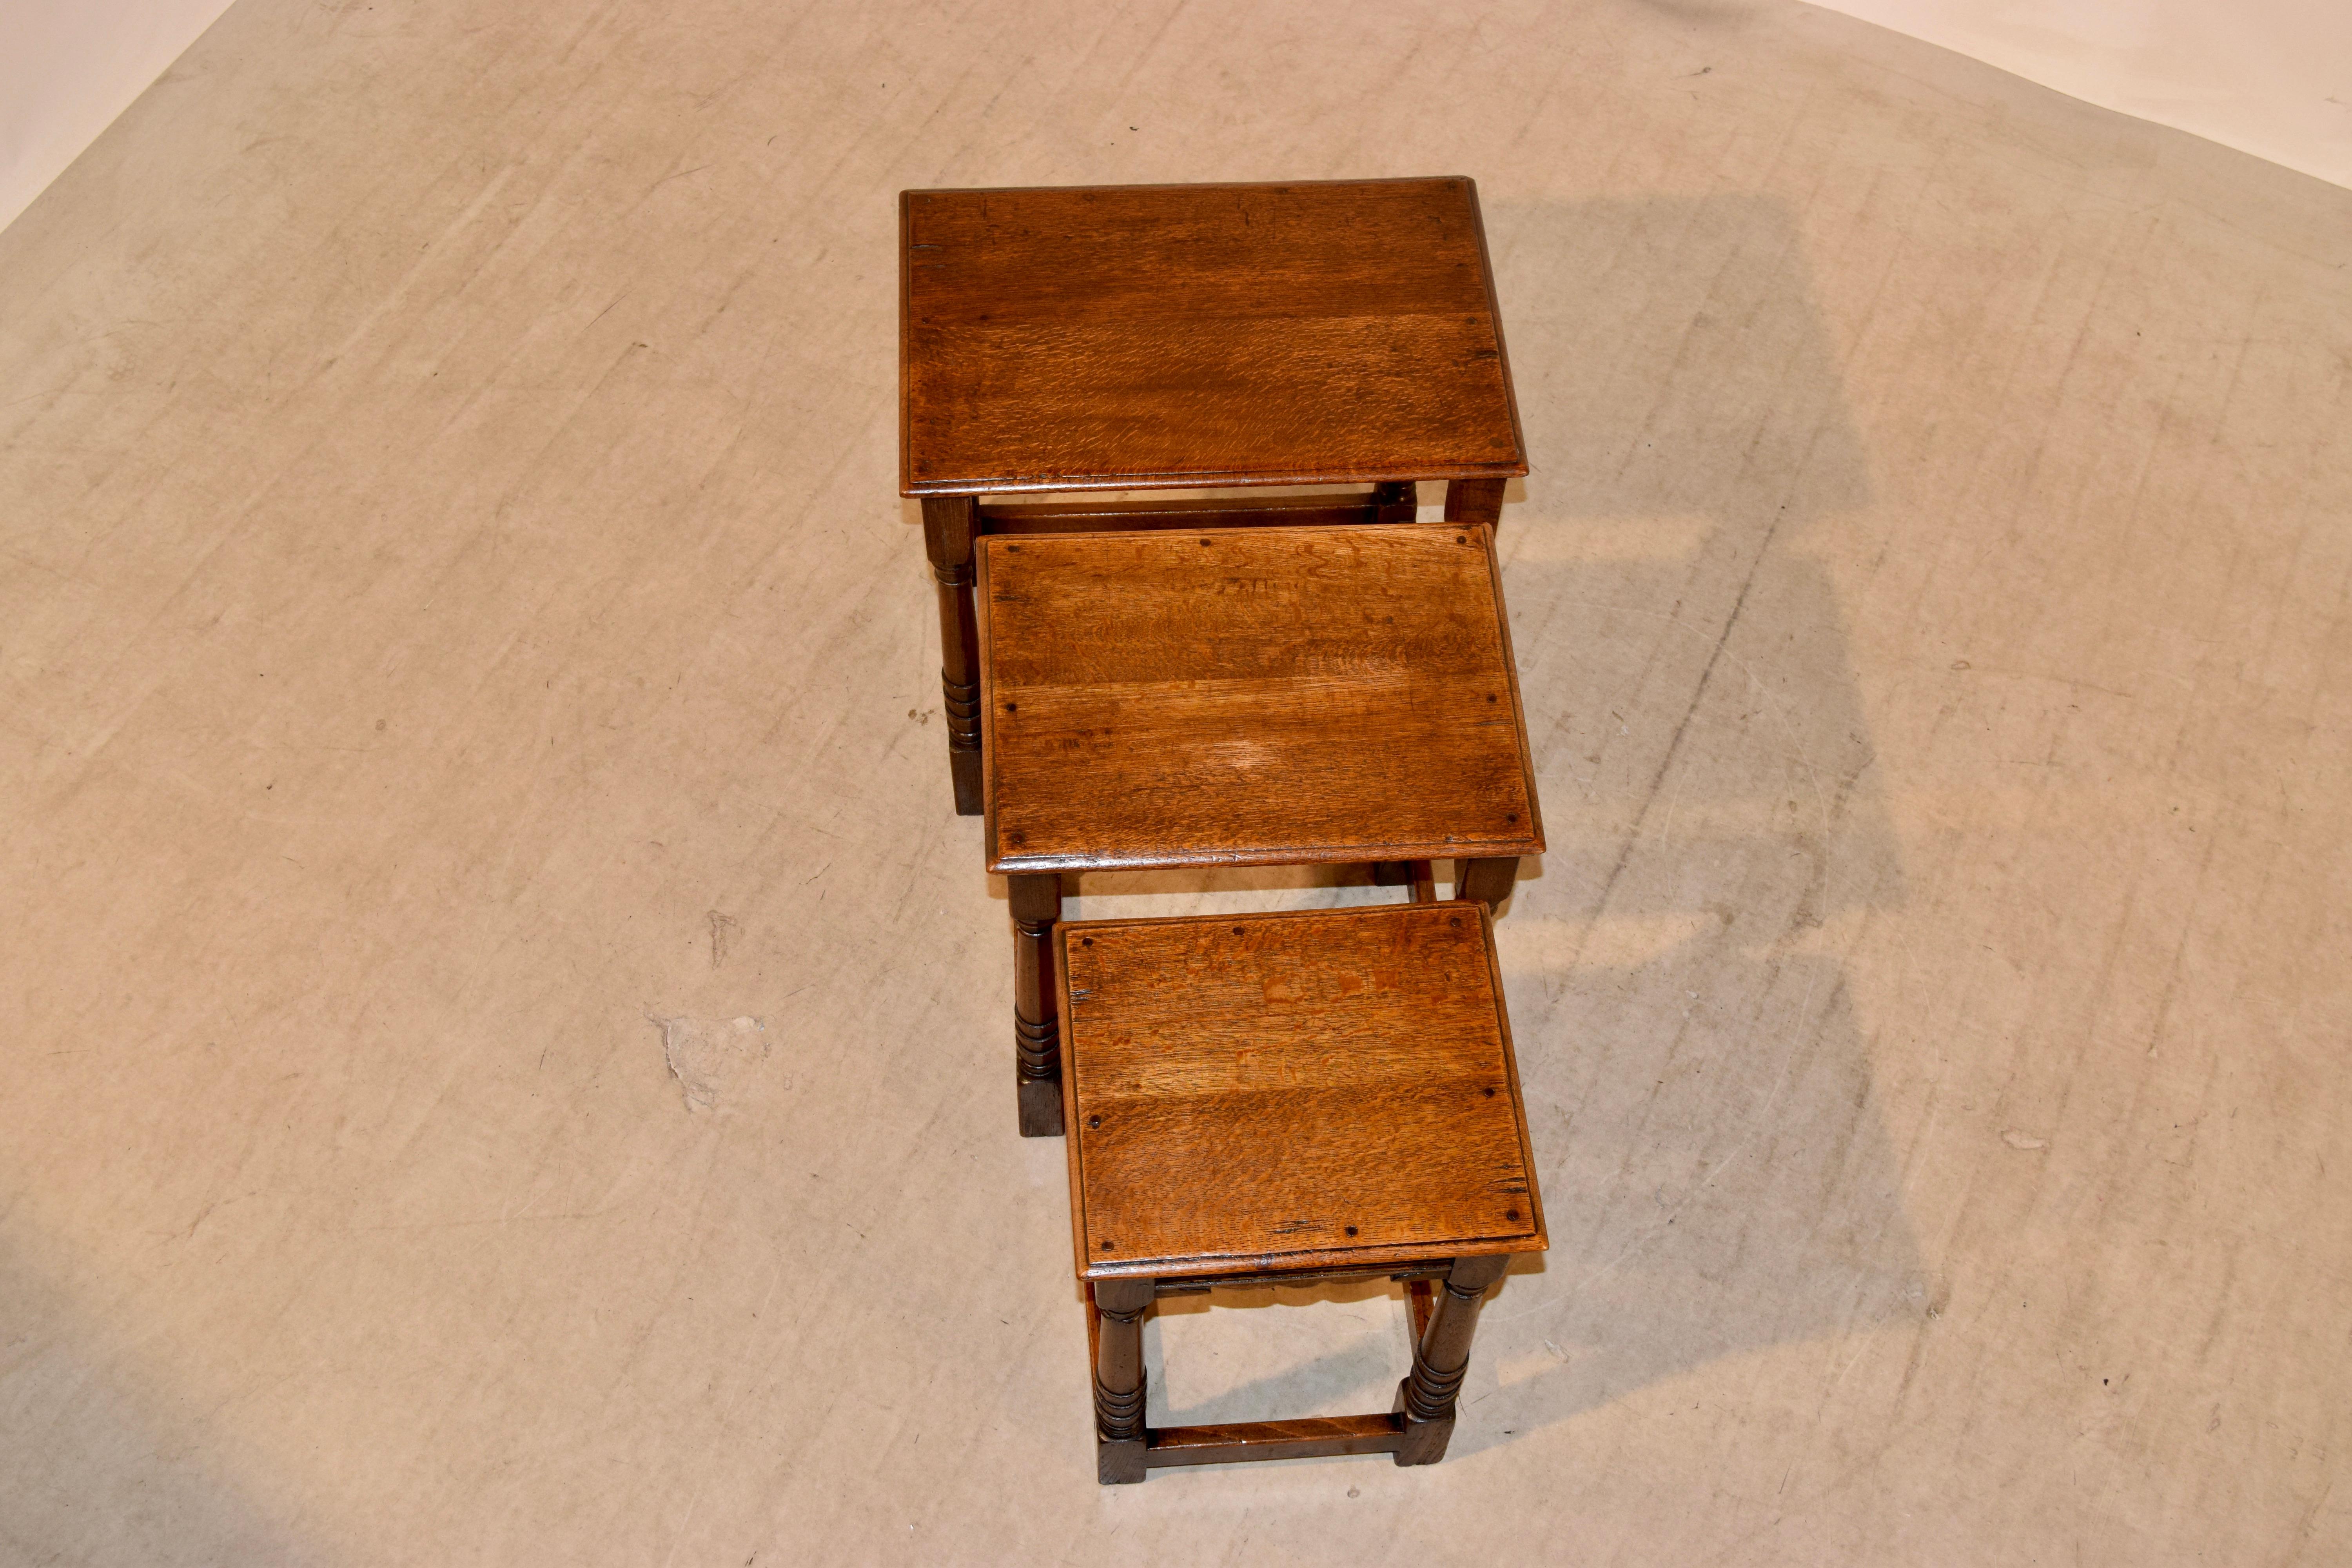 Early 20th Century Nest of Three Tables, circa 1900